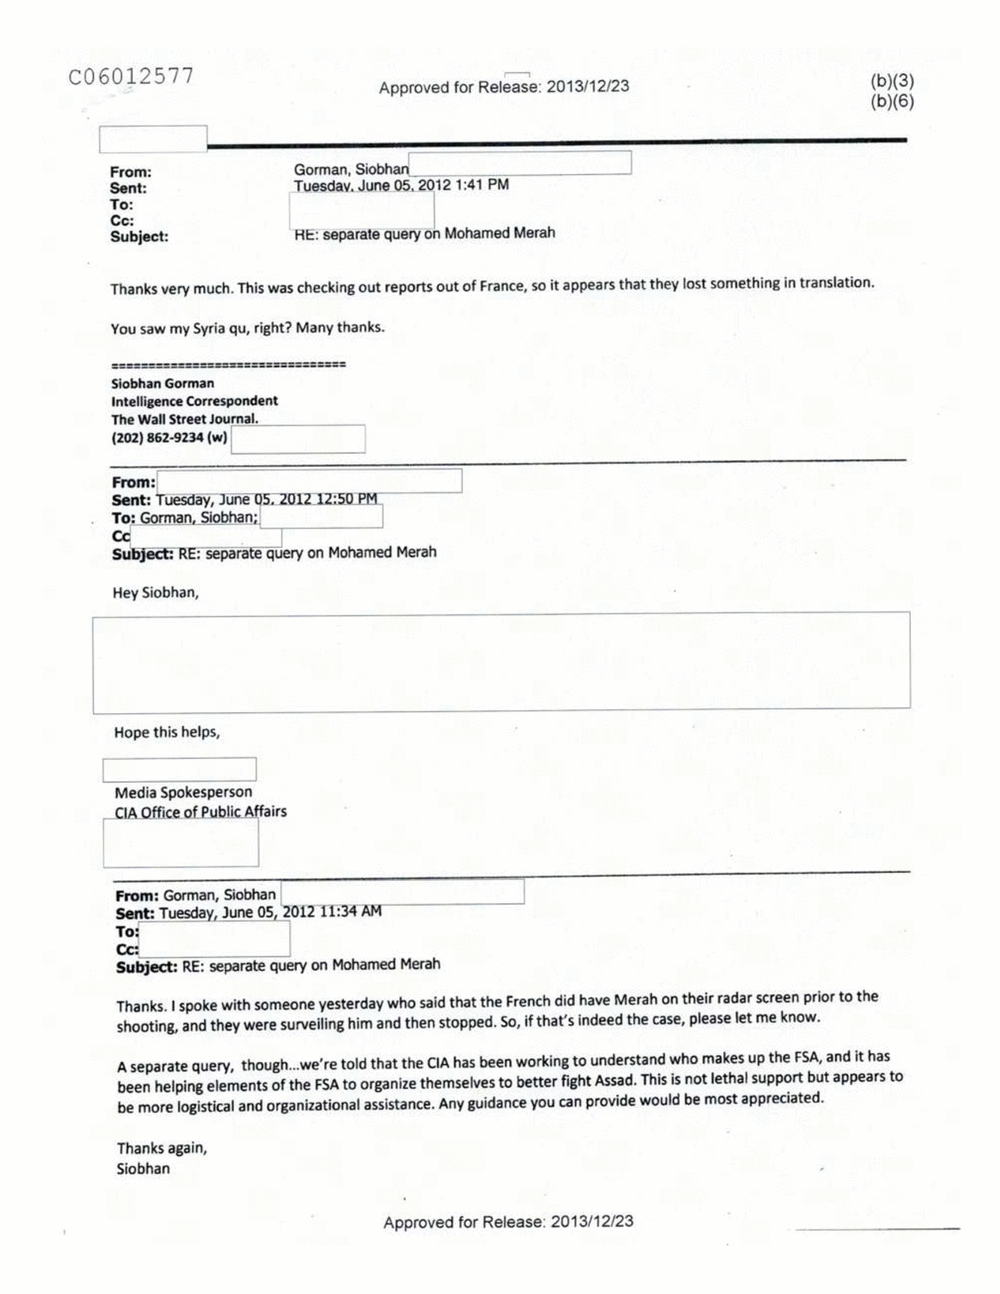 Page 112 from Email Correspondence Between Reporters and CIA Flacks